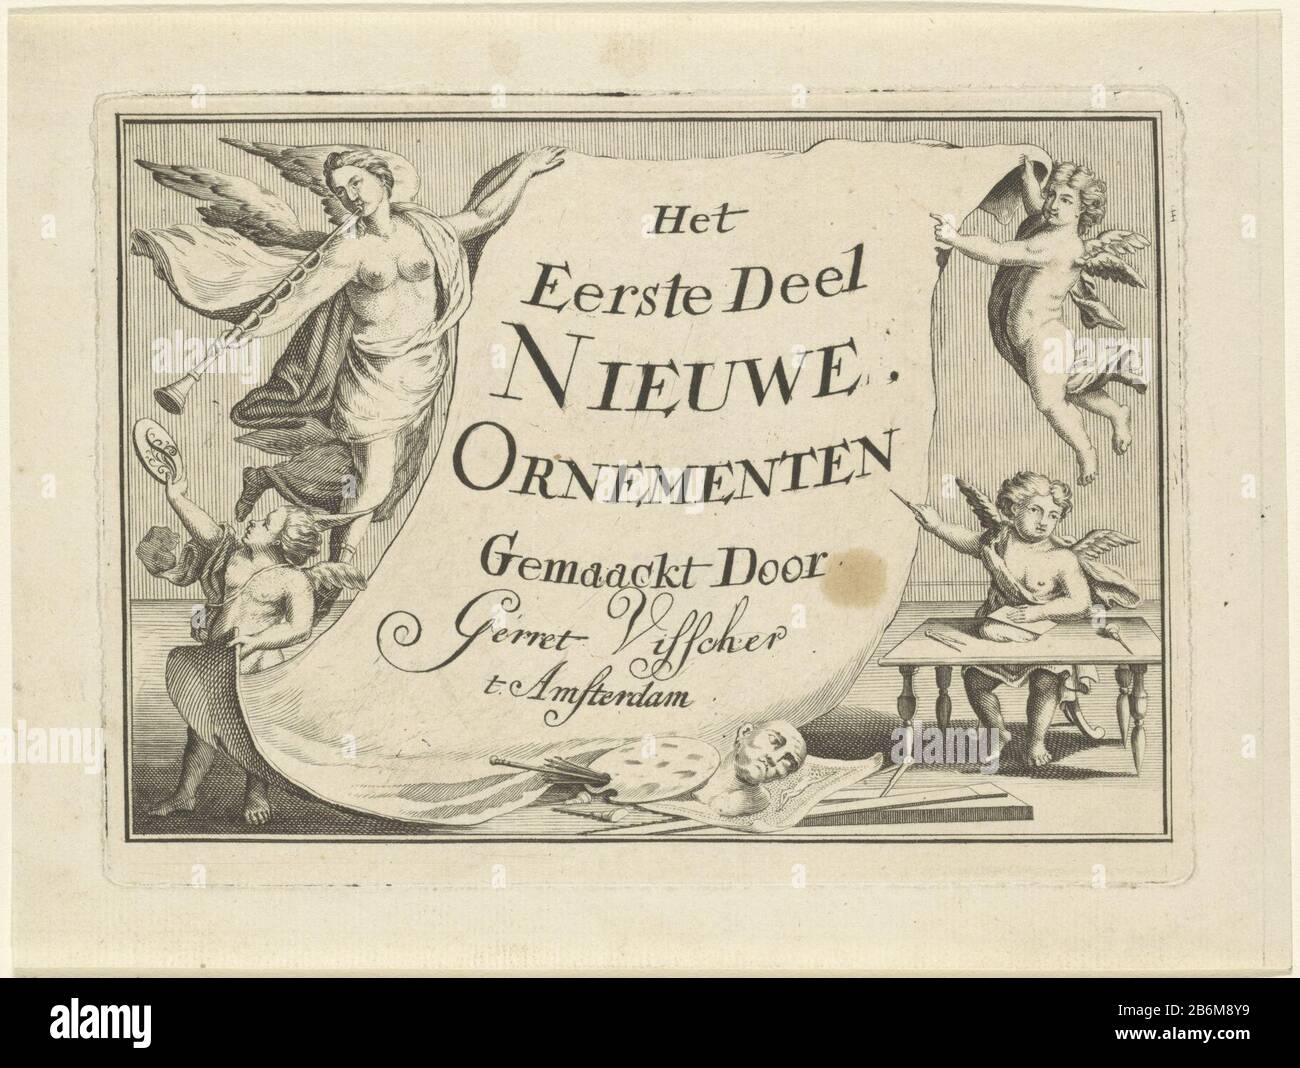 Faam en verschillende putti tonen een blad met titel Het Eerste Deel Nieuwe Ornementen () (serietitel op object) Fame and several putti show a sheet titelHet First Part New ornaments (...) (series title object) Property Type: print title picture ornament picture Item number: RP-P-OB-6492 Manufacturer : printmaker: Gerrit Visscher ( indicated on object) Place manufacture: Amsterdam Date: 1690 - 1710 Physical characteristics: etching and engra material: paper Technique: etching / engra (printing process) Measurements: plate edge: h 122 mm × W 167 mm Subject: Fame; 'Fama', 'Fama buona', 'Fama chi Stock Photo